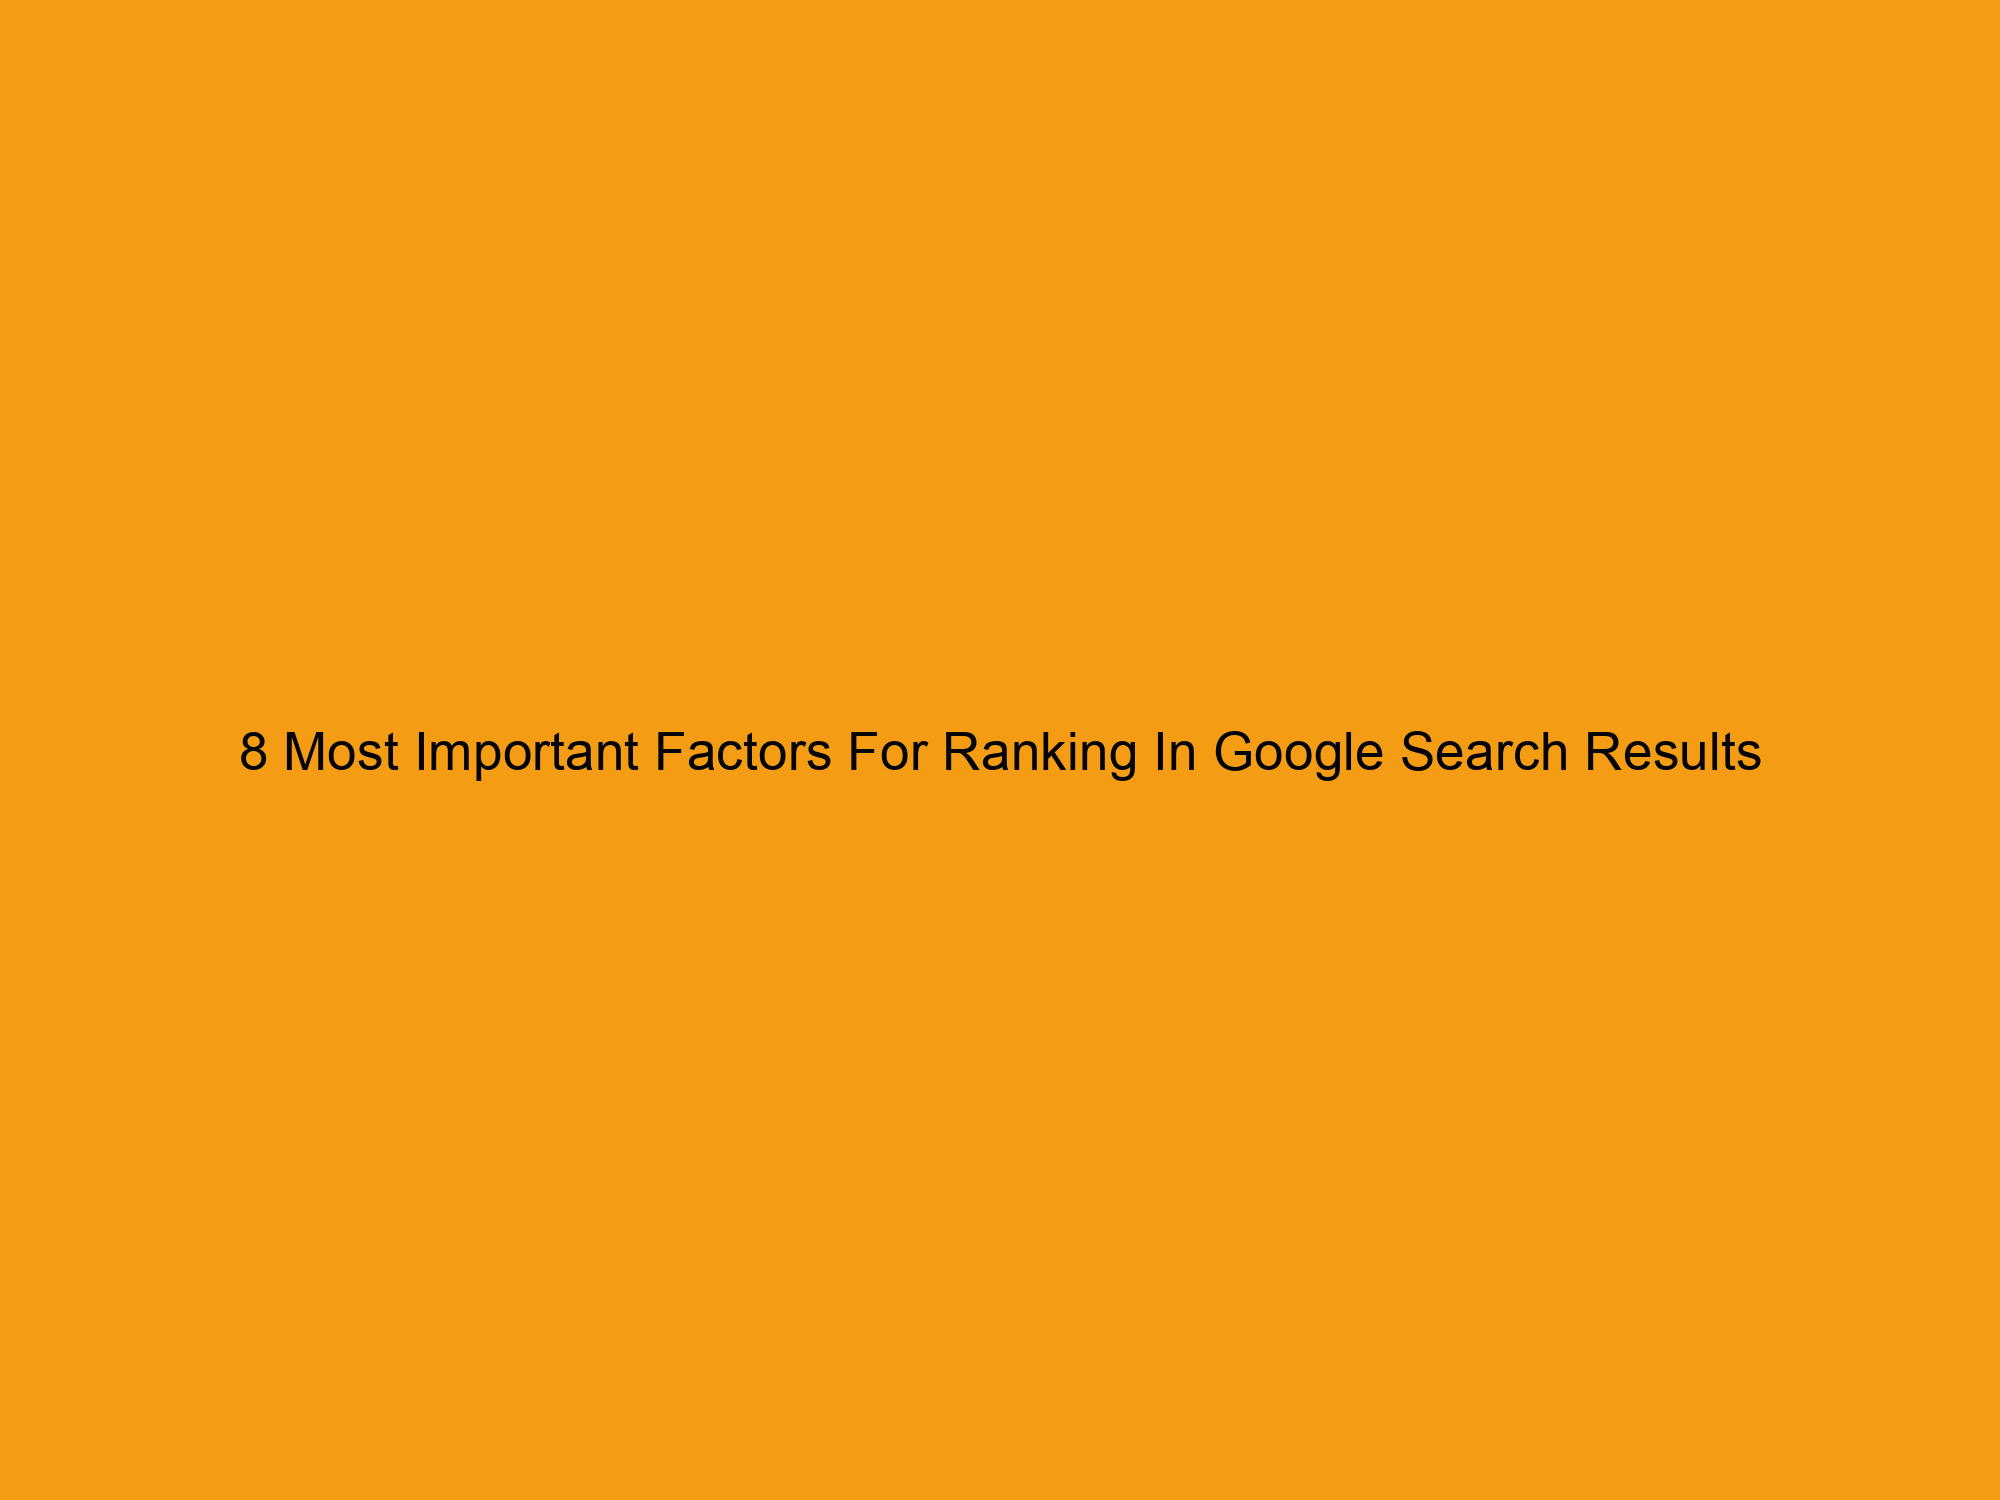 8 Most Important Factors For Ranking In Google Search Results